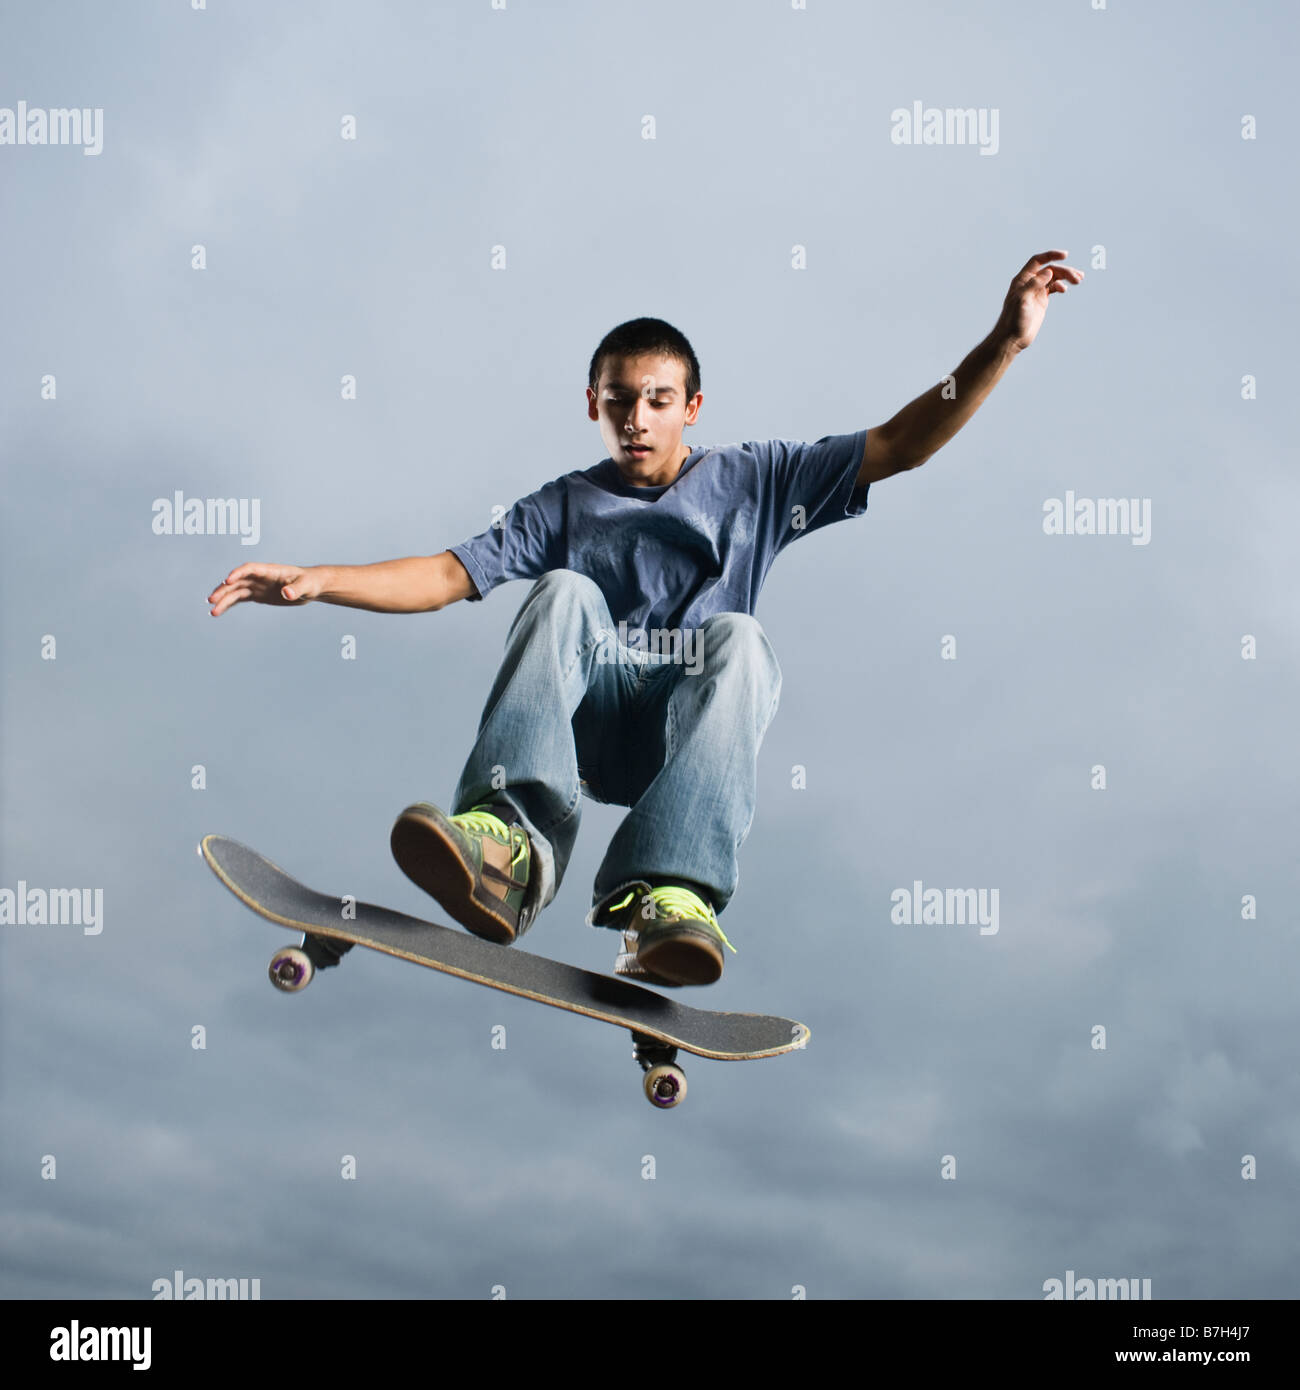 Mixed race teenager in mid-air on skateboard Stock Photo